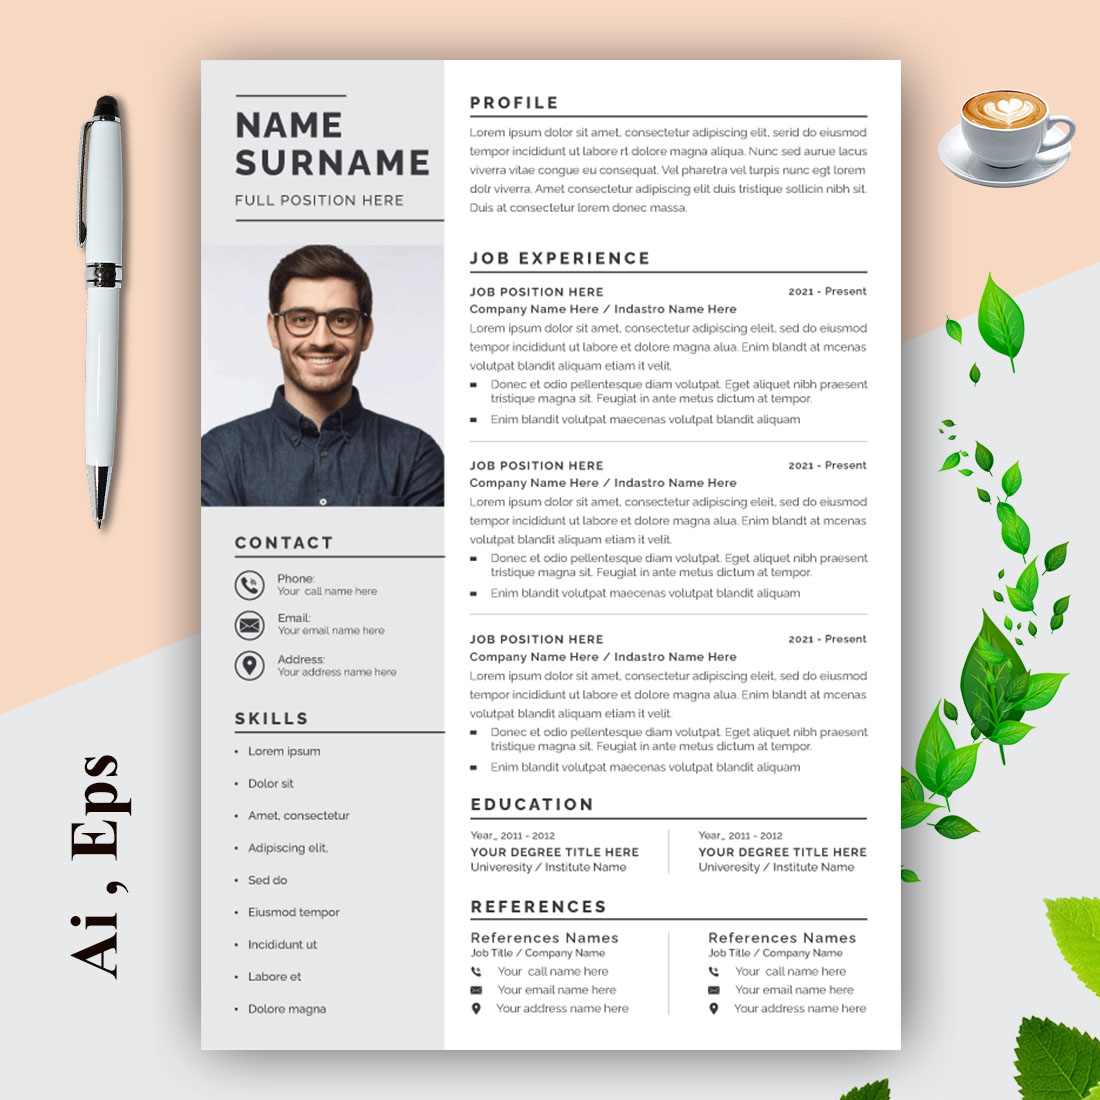 Resume Design Template with Cover Letter Clean Cv Layout cover image.